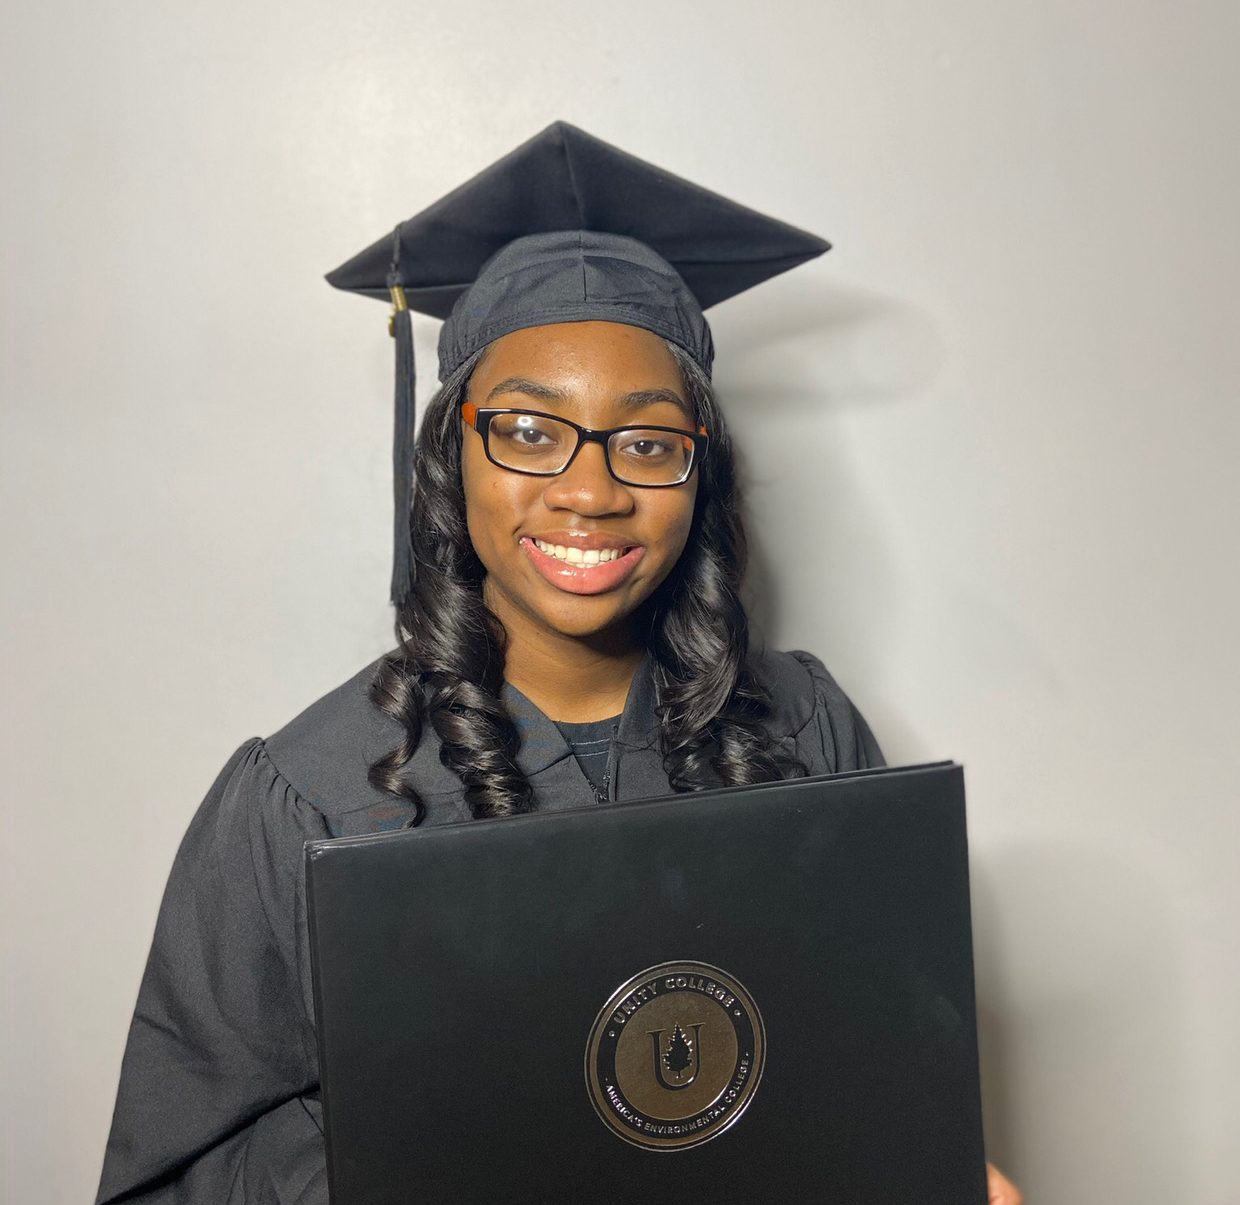 Black and brilliant: Dorothy Jean Tillman secures a master's degree at 14